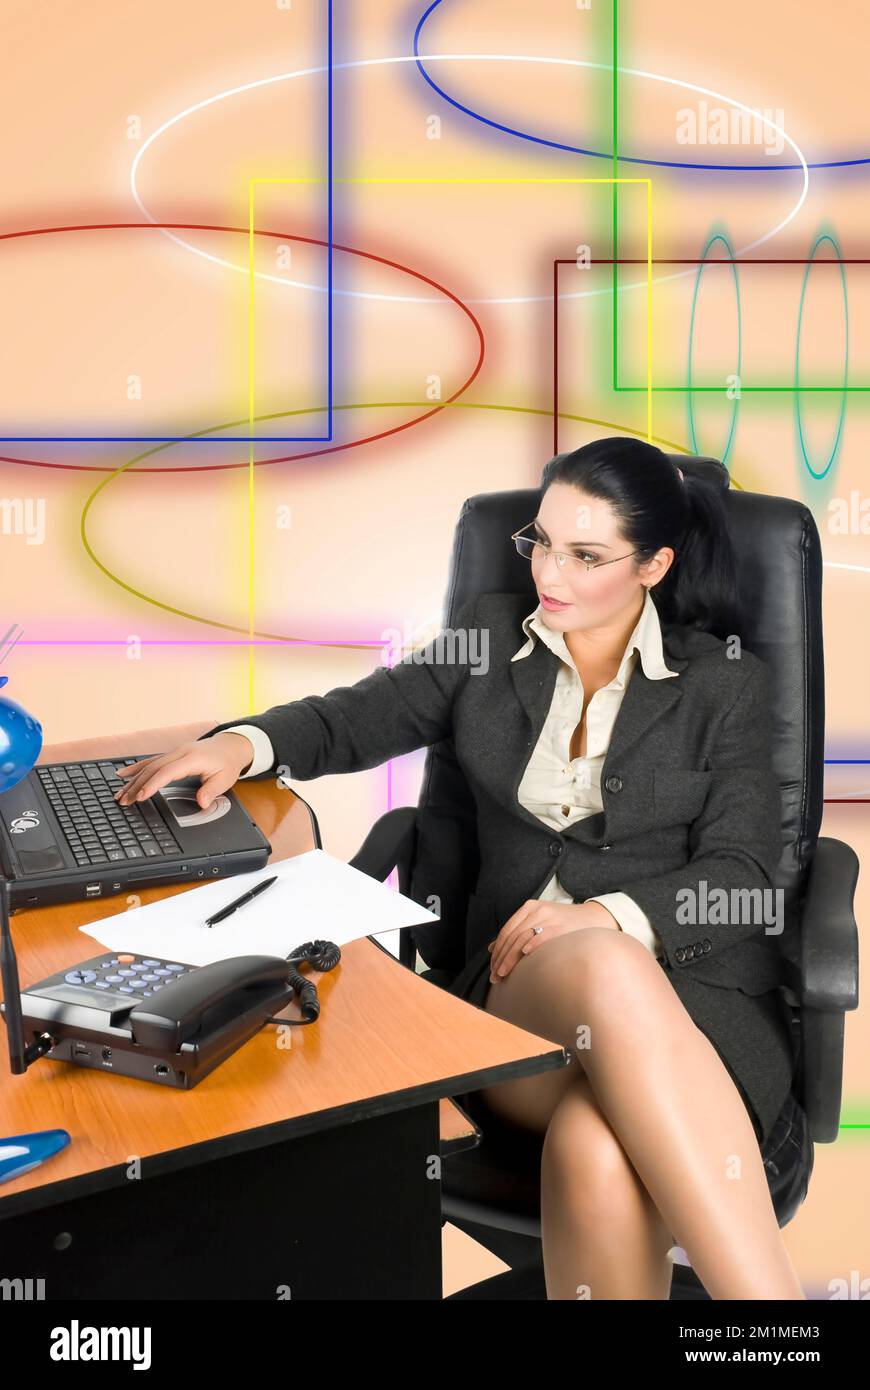 Business Woman working on laptop at office Banque D'Images